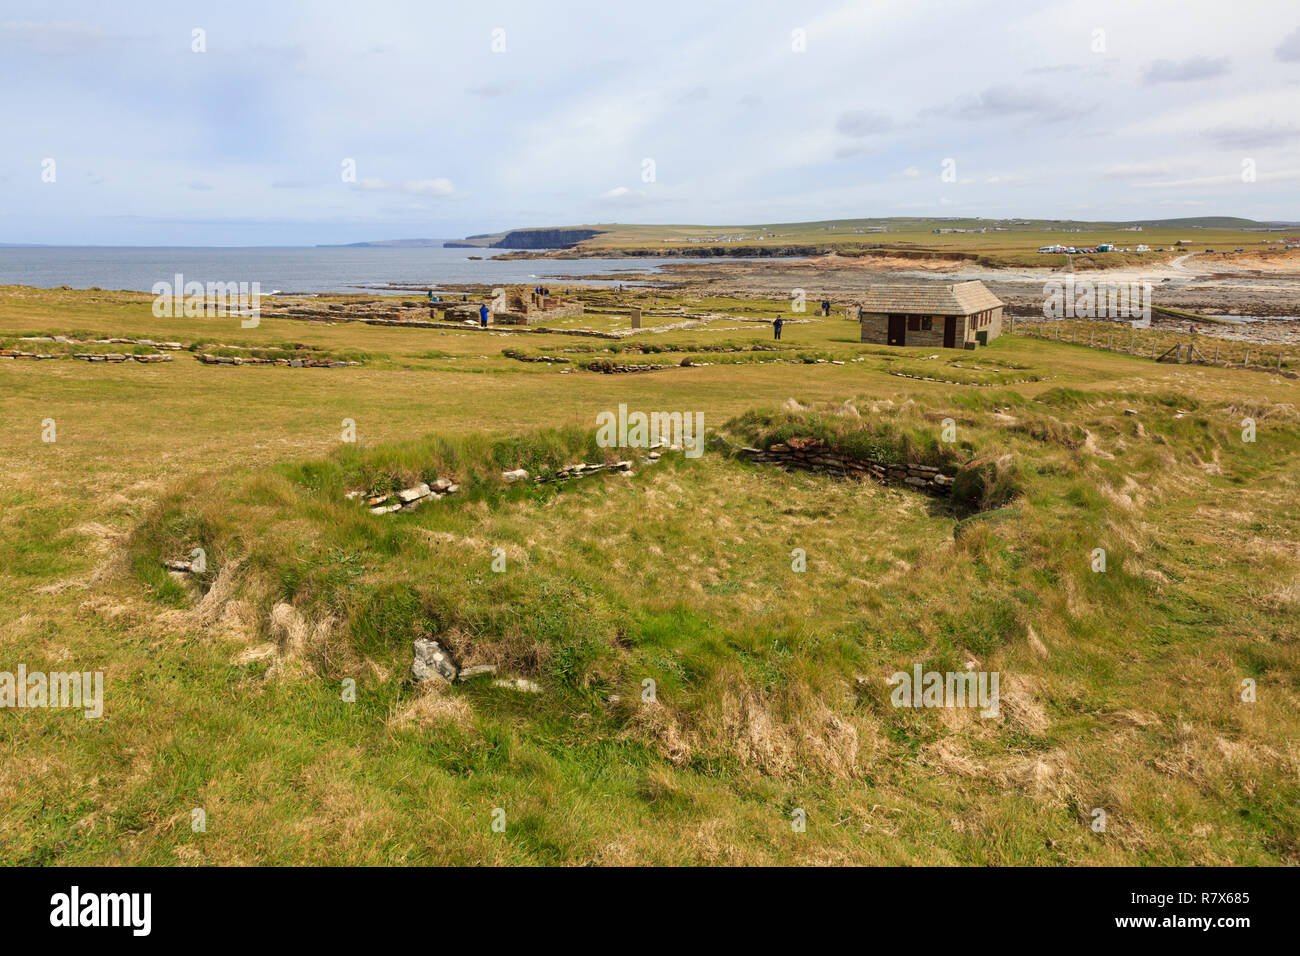 Remains of Norse house in a settlement excavated on the Brough of Birsay, Orkney Mainland, Scotland, UK, Great Britain Stock Photo